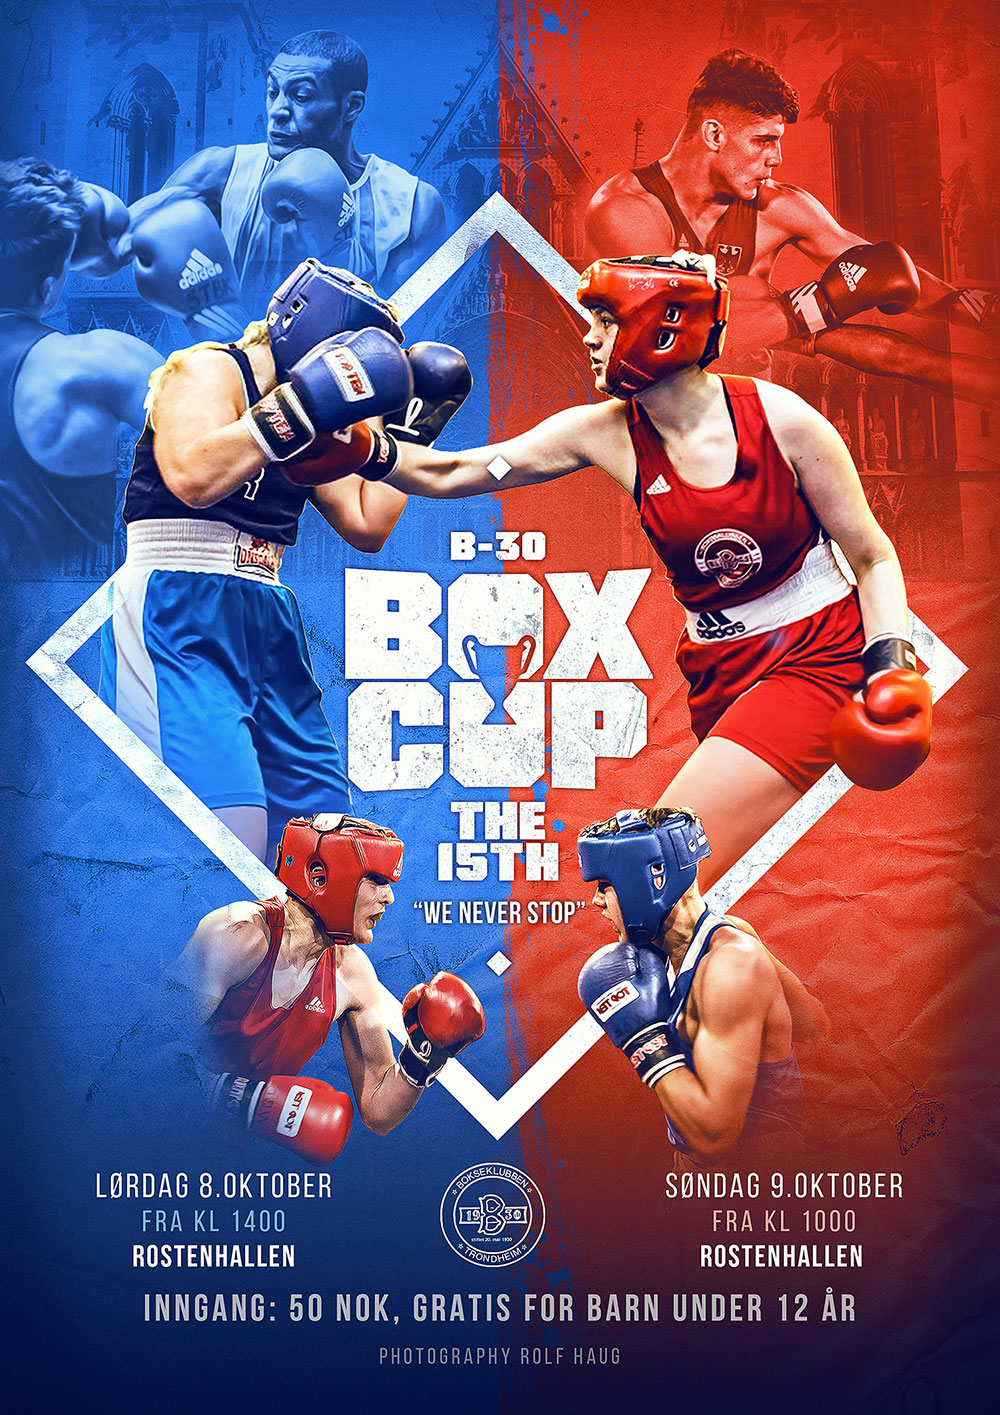 poster for norway's boxcup